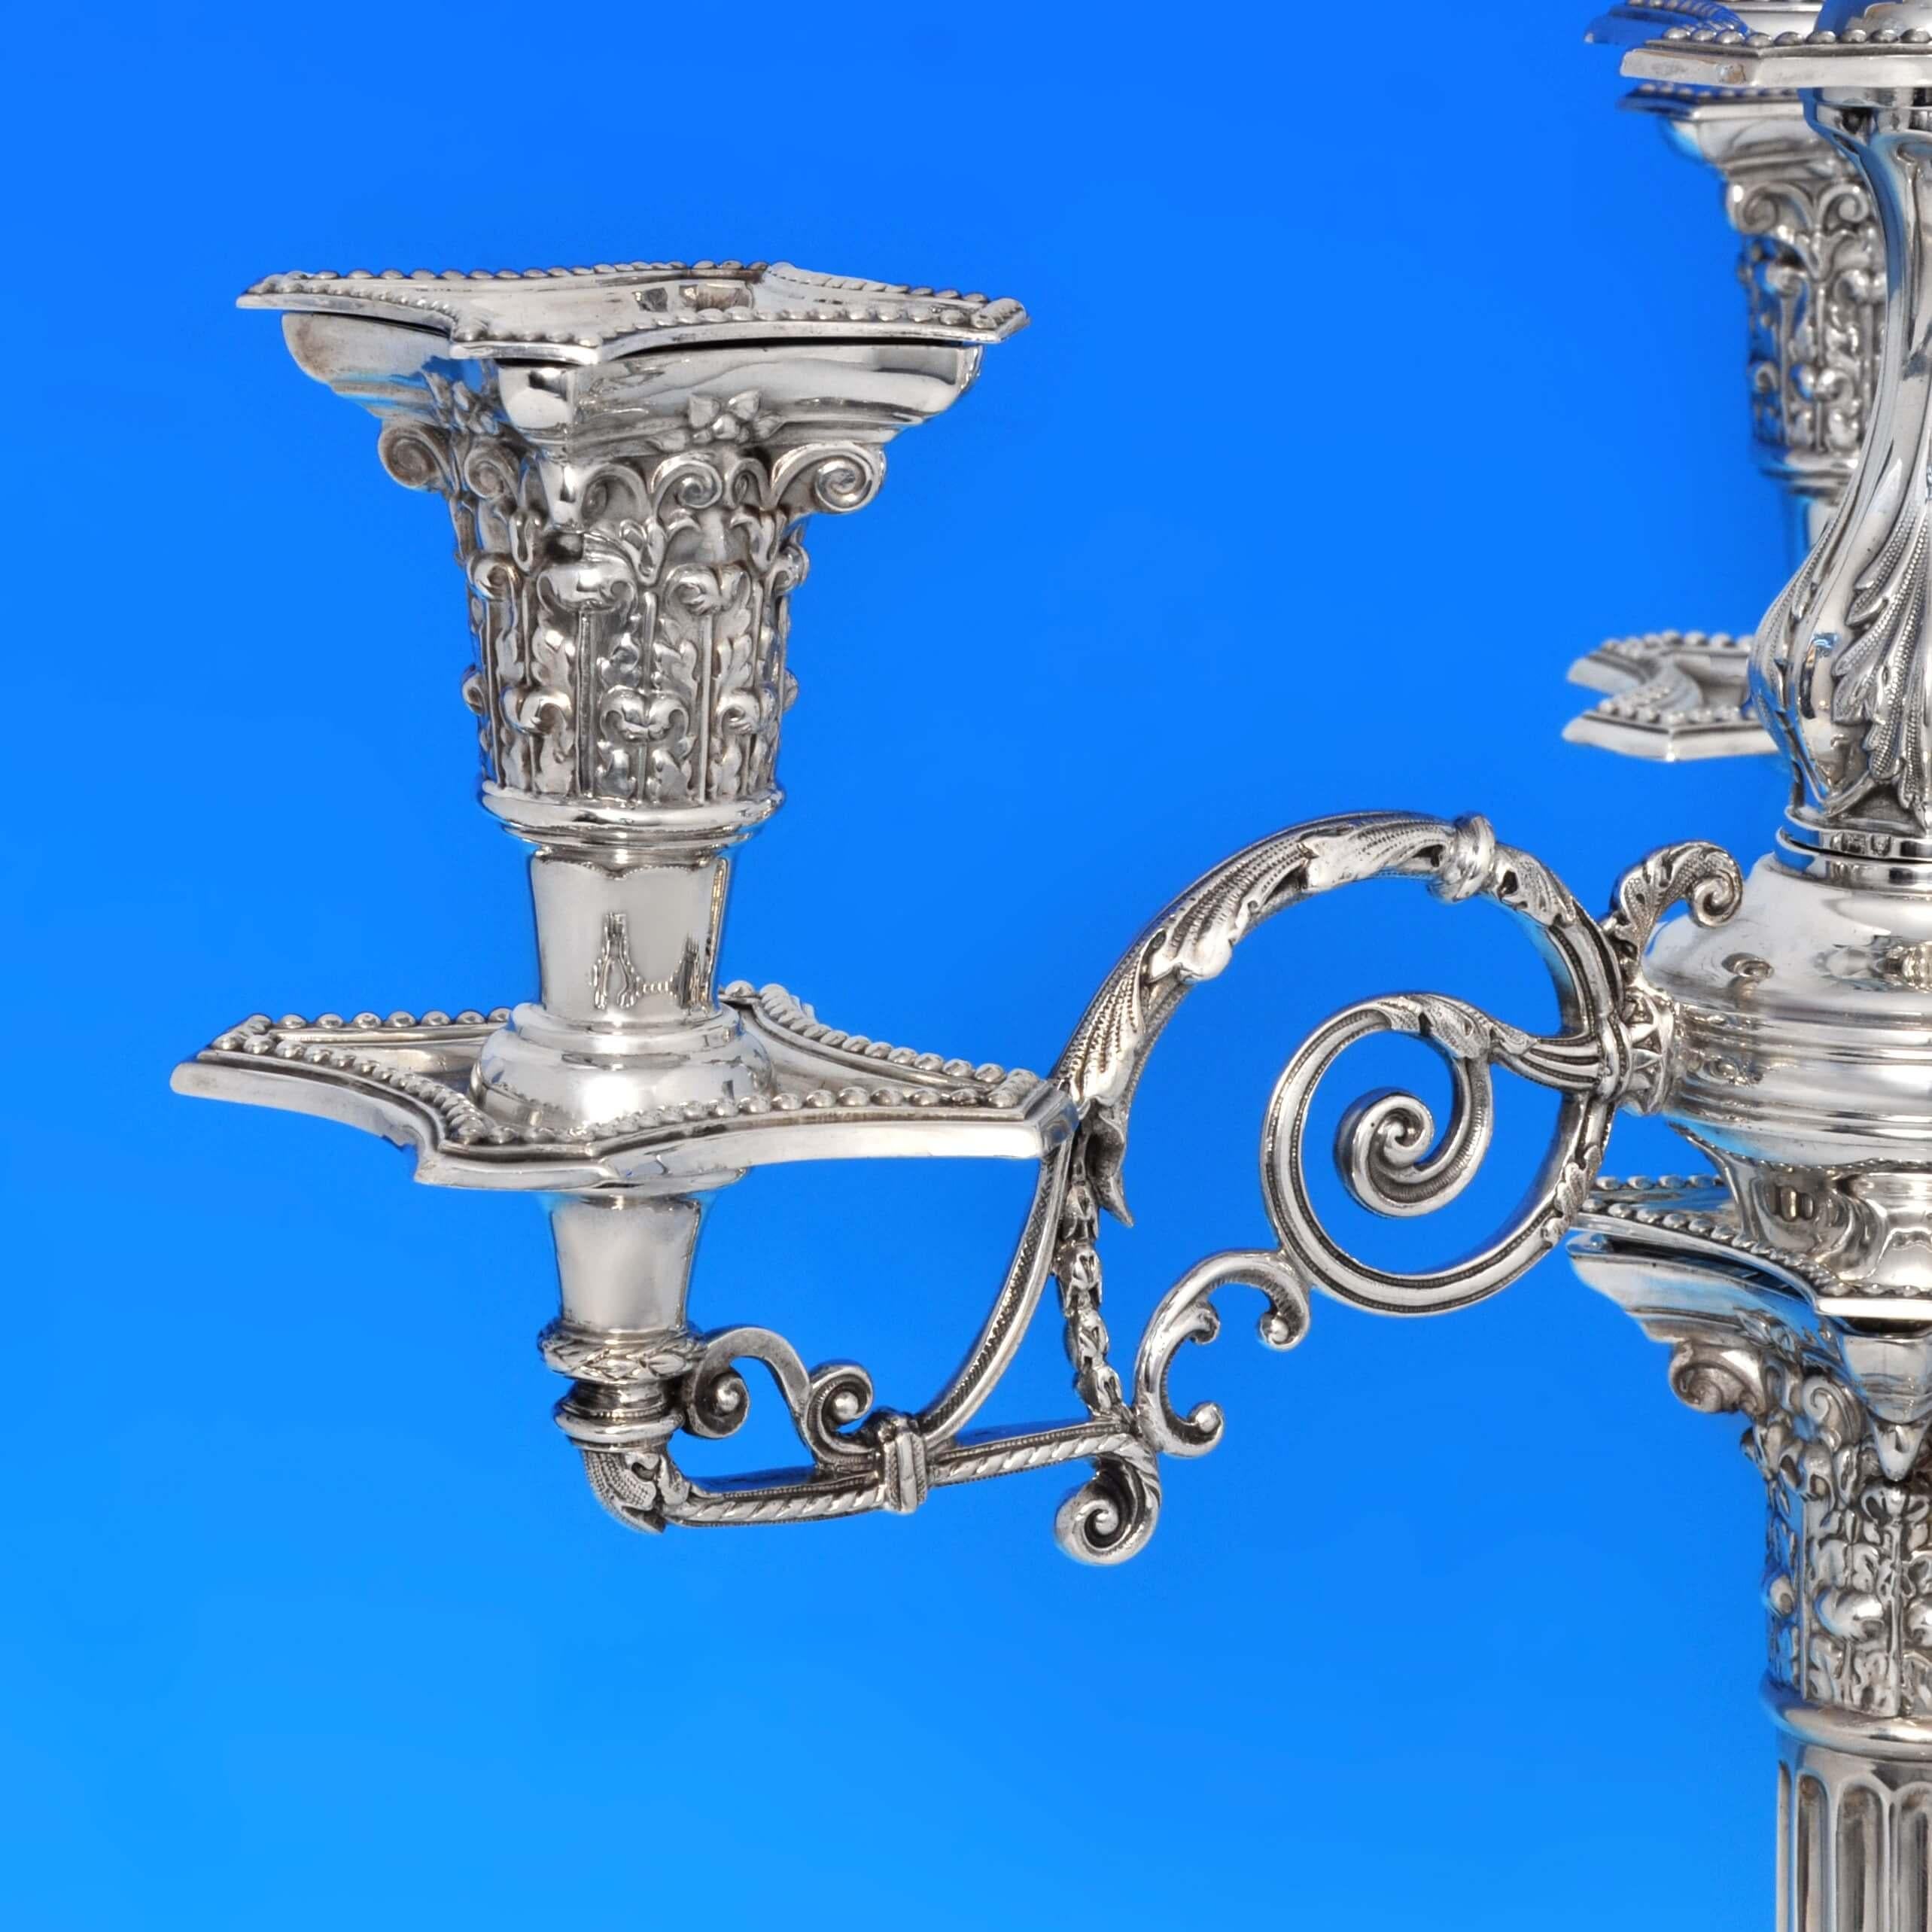 Hallmarked in London in 1901 by C. C. Pilling, this attractive pair of late Victorian, Antique, Sterling Silver Candelabra are in the Corinthian column style featuring bead borders, stepped bases, fluted columns, corinthian capitals, and four light